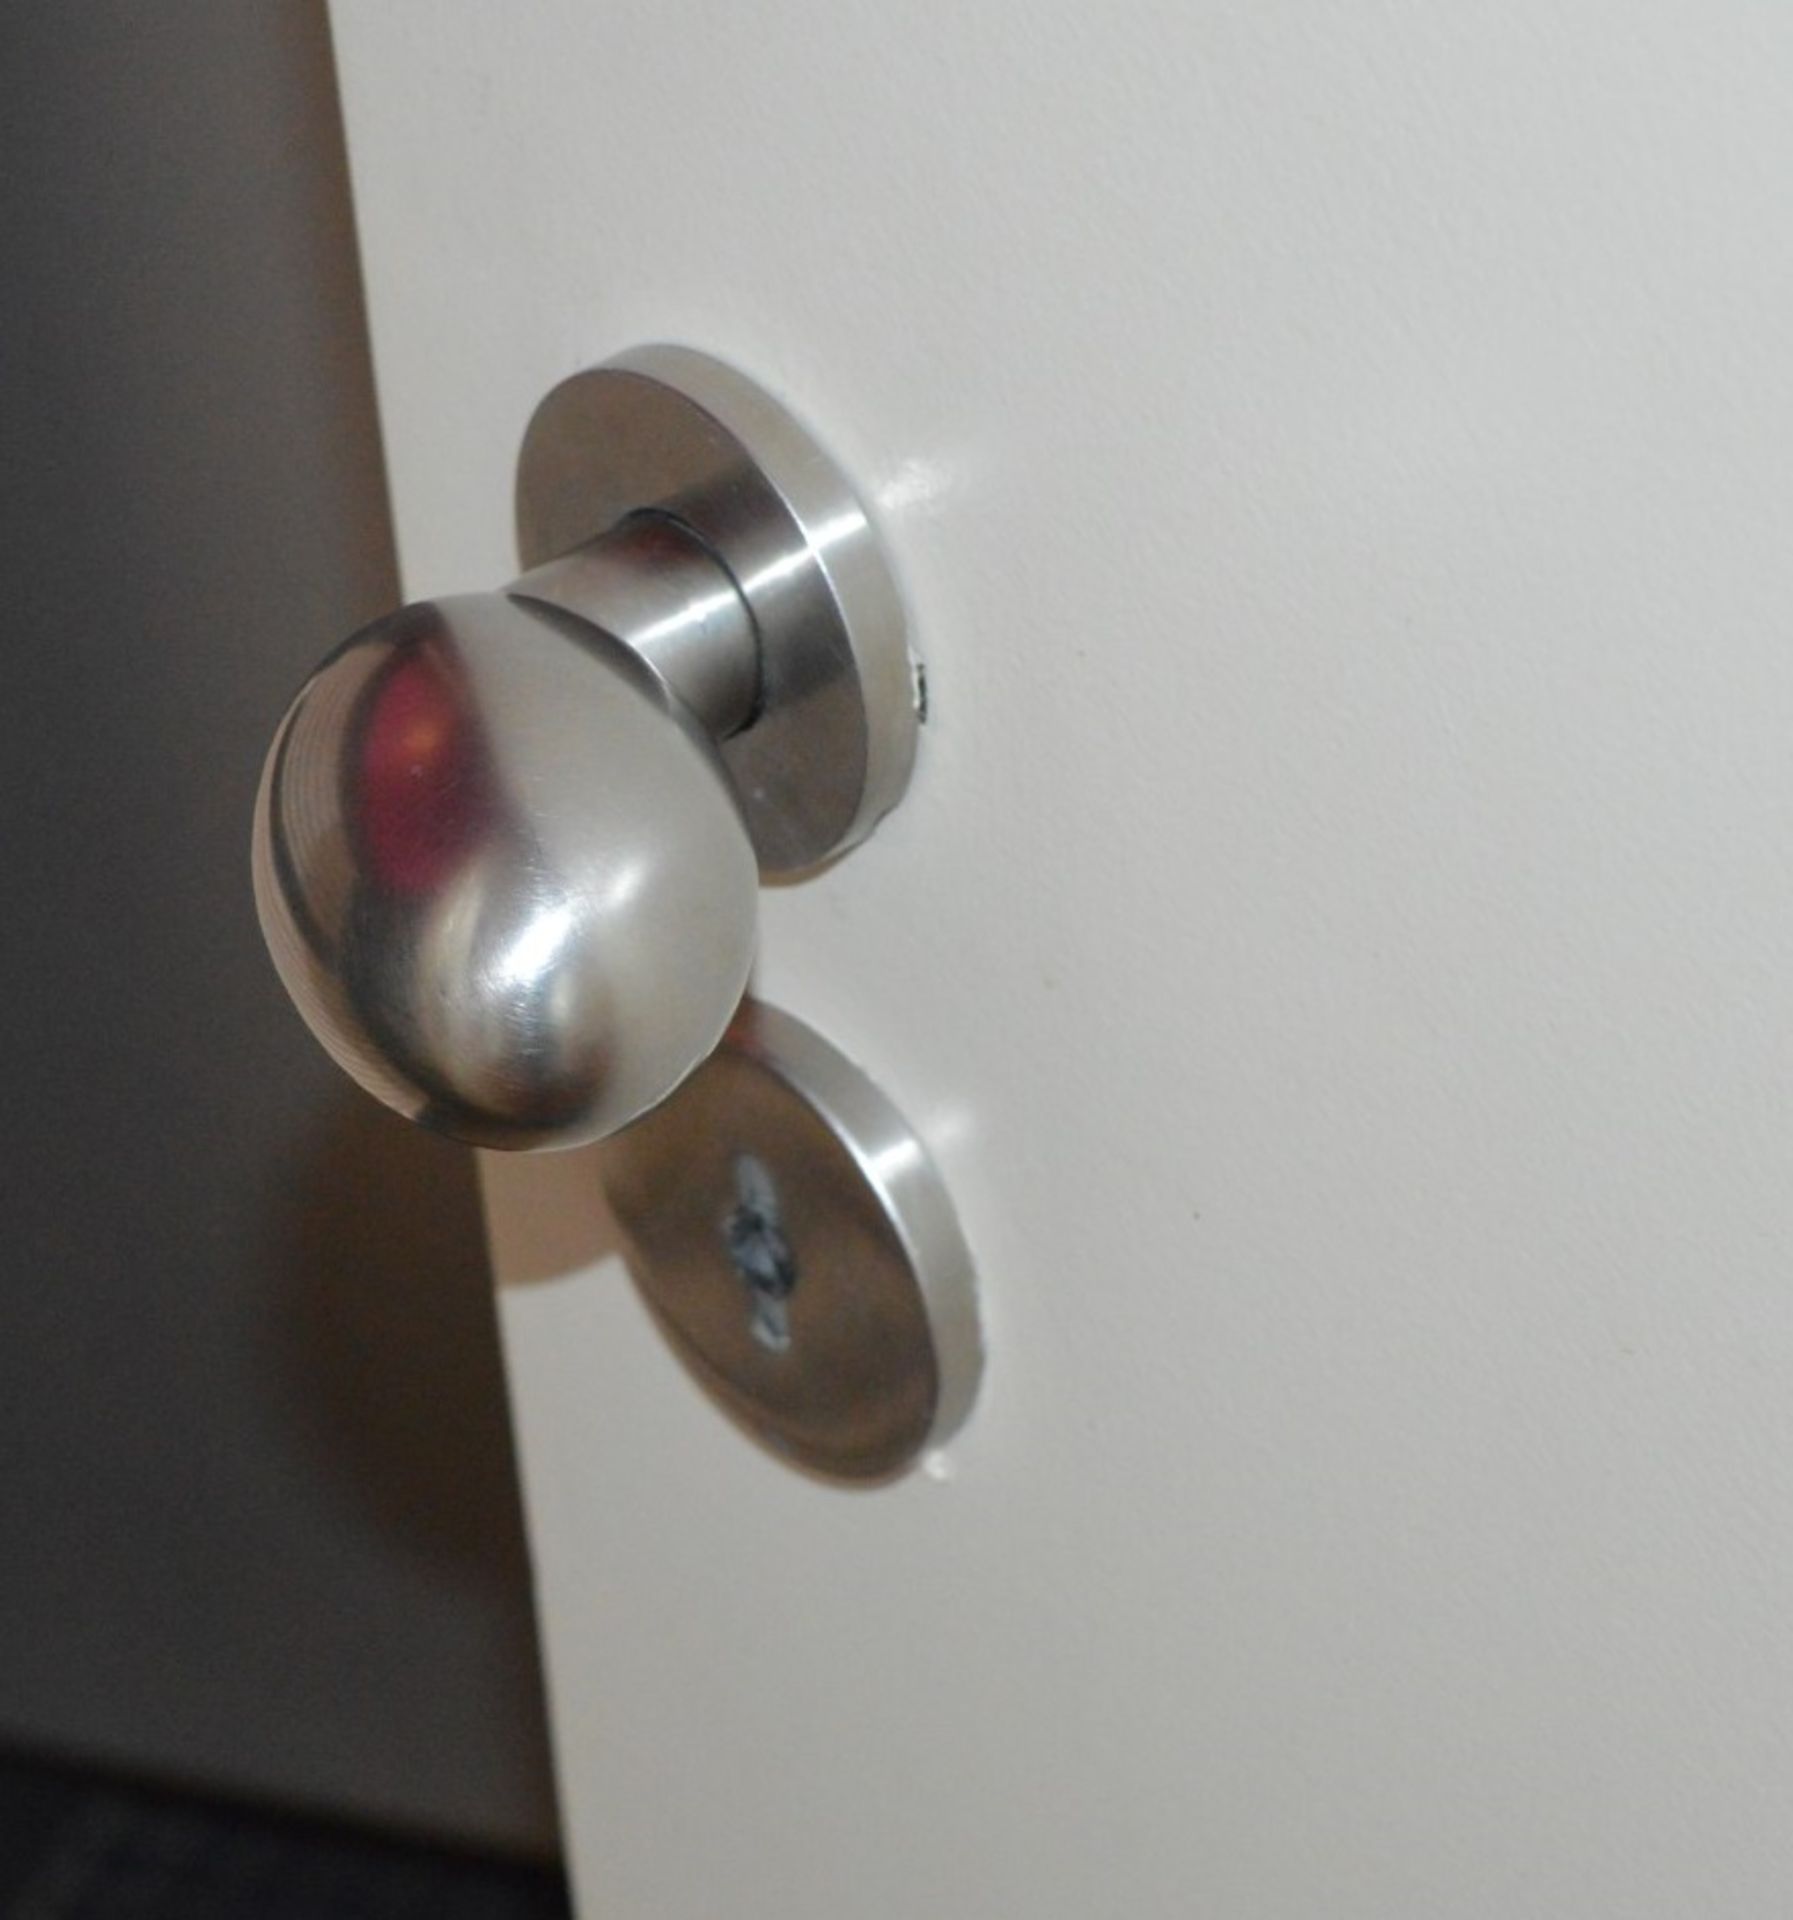 1 x Fire Resistant Internal Door - Fitted With Stylish Chrome Door Knobs, Triple Hinges and - Image 3 of 6